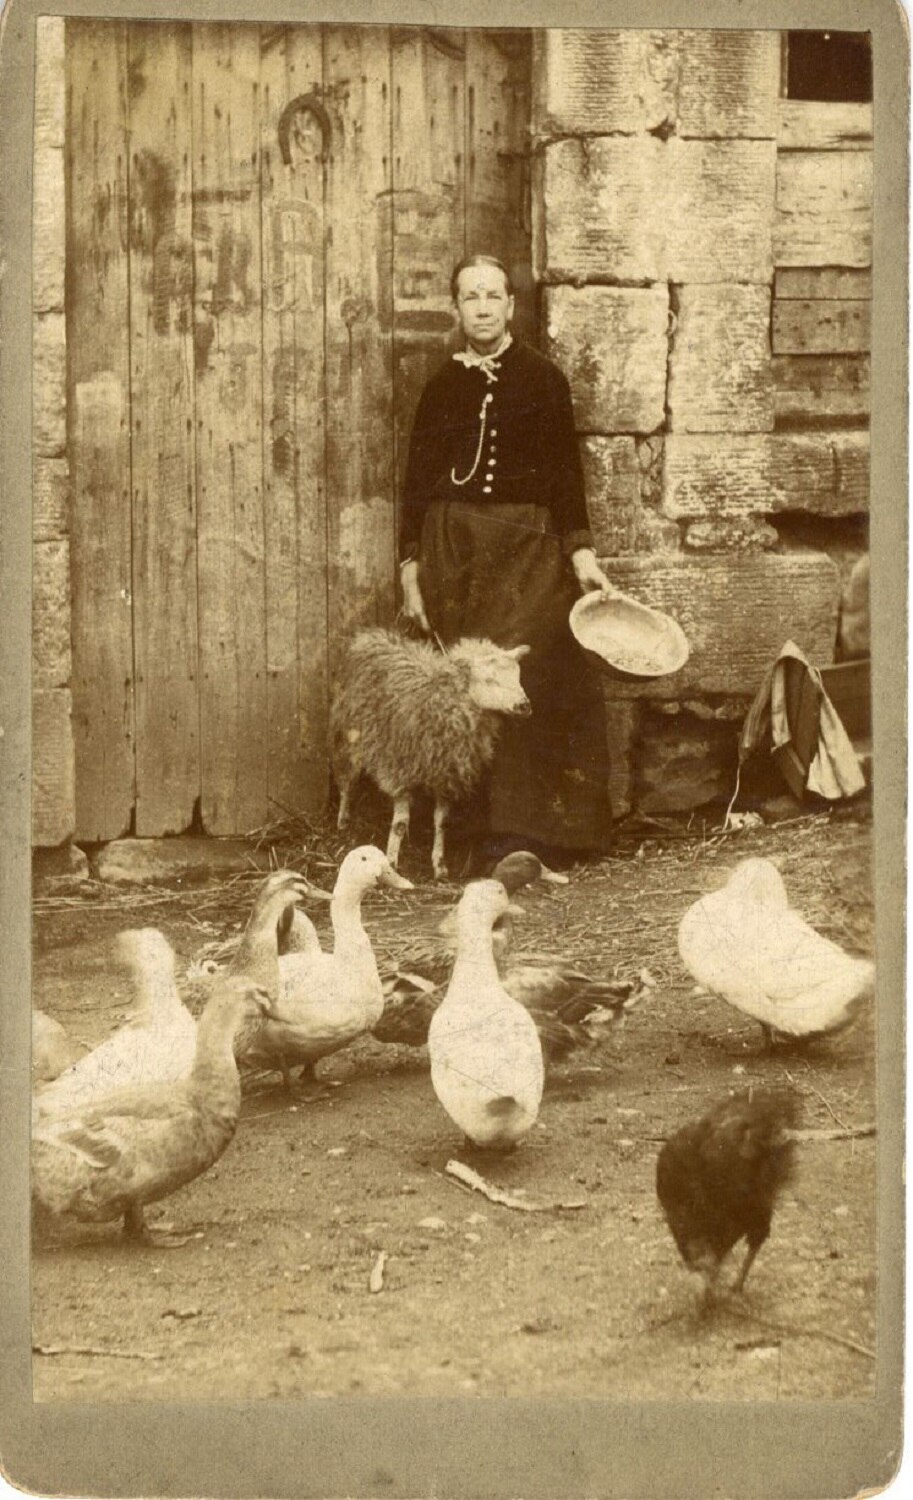 Unnamed woman standing outside a building holding a sheep and feeding geese, South Queensferry, 1897 – 1903. Image © City of Edinburgh Council Museums & Galleries; Queensferry Museum